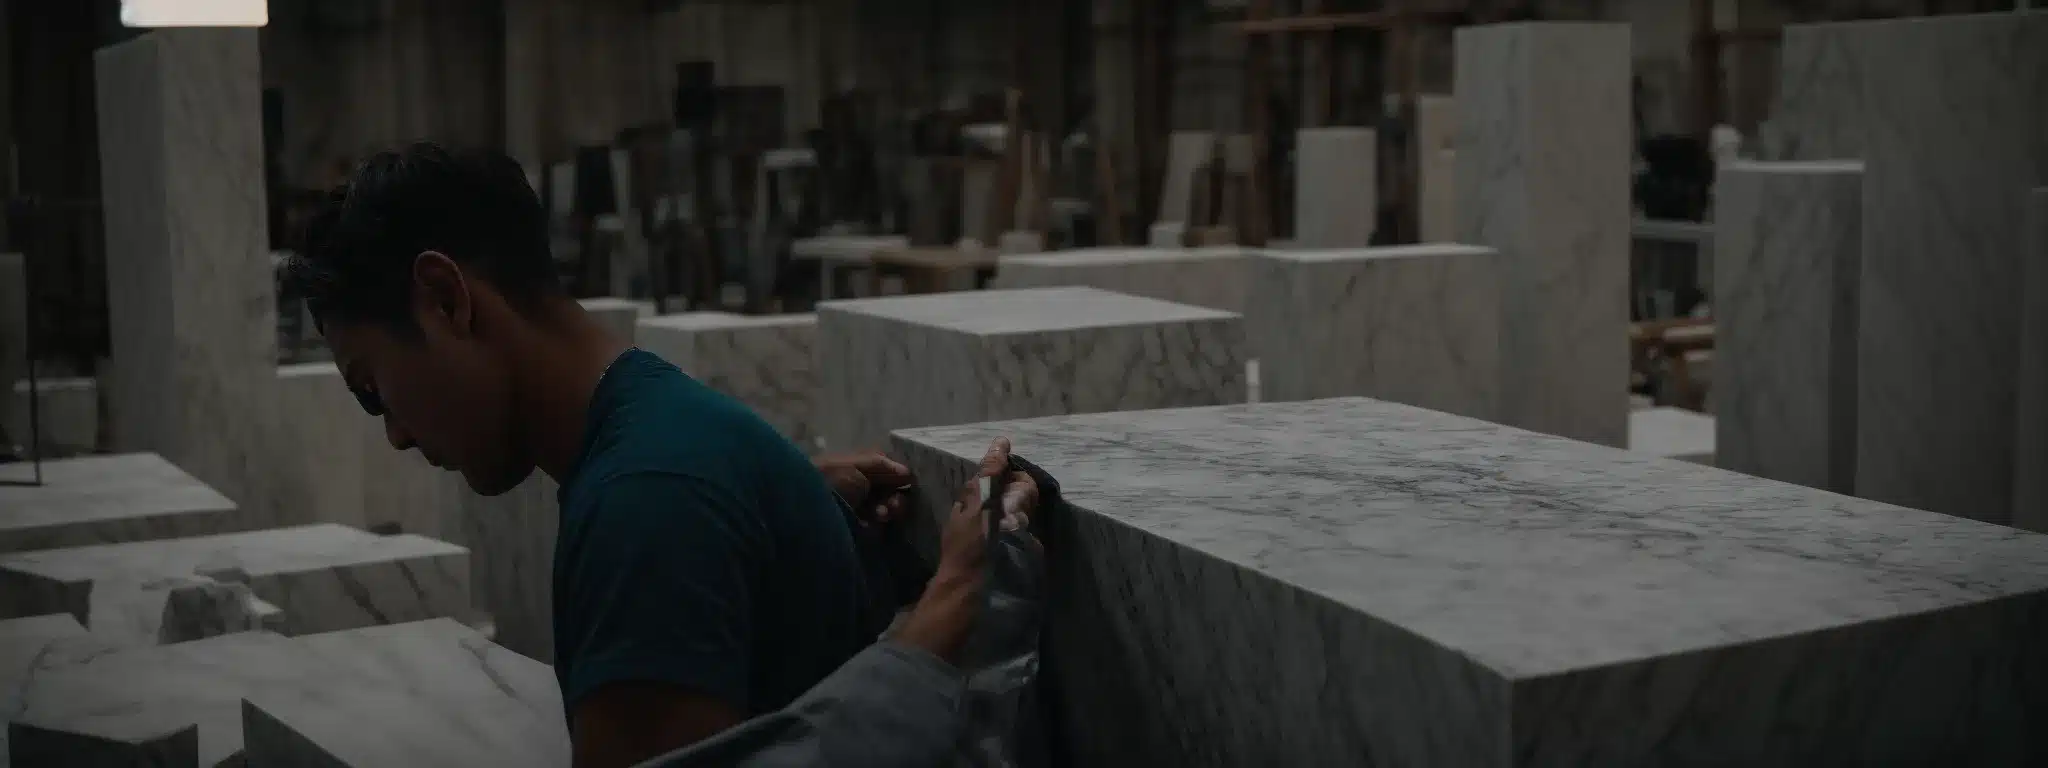 A Sculptor Focused Intently On Shaping A Large, Unblemished Block Of Marble Into A Distinct Form.